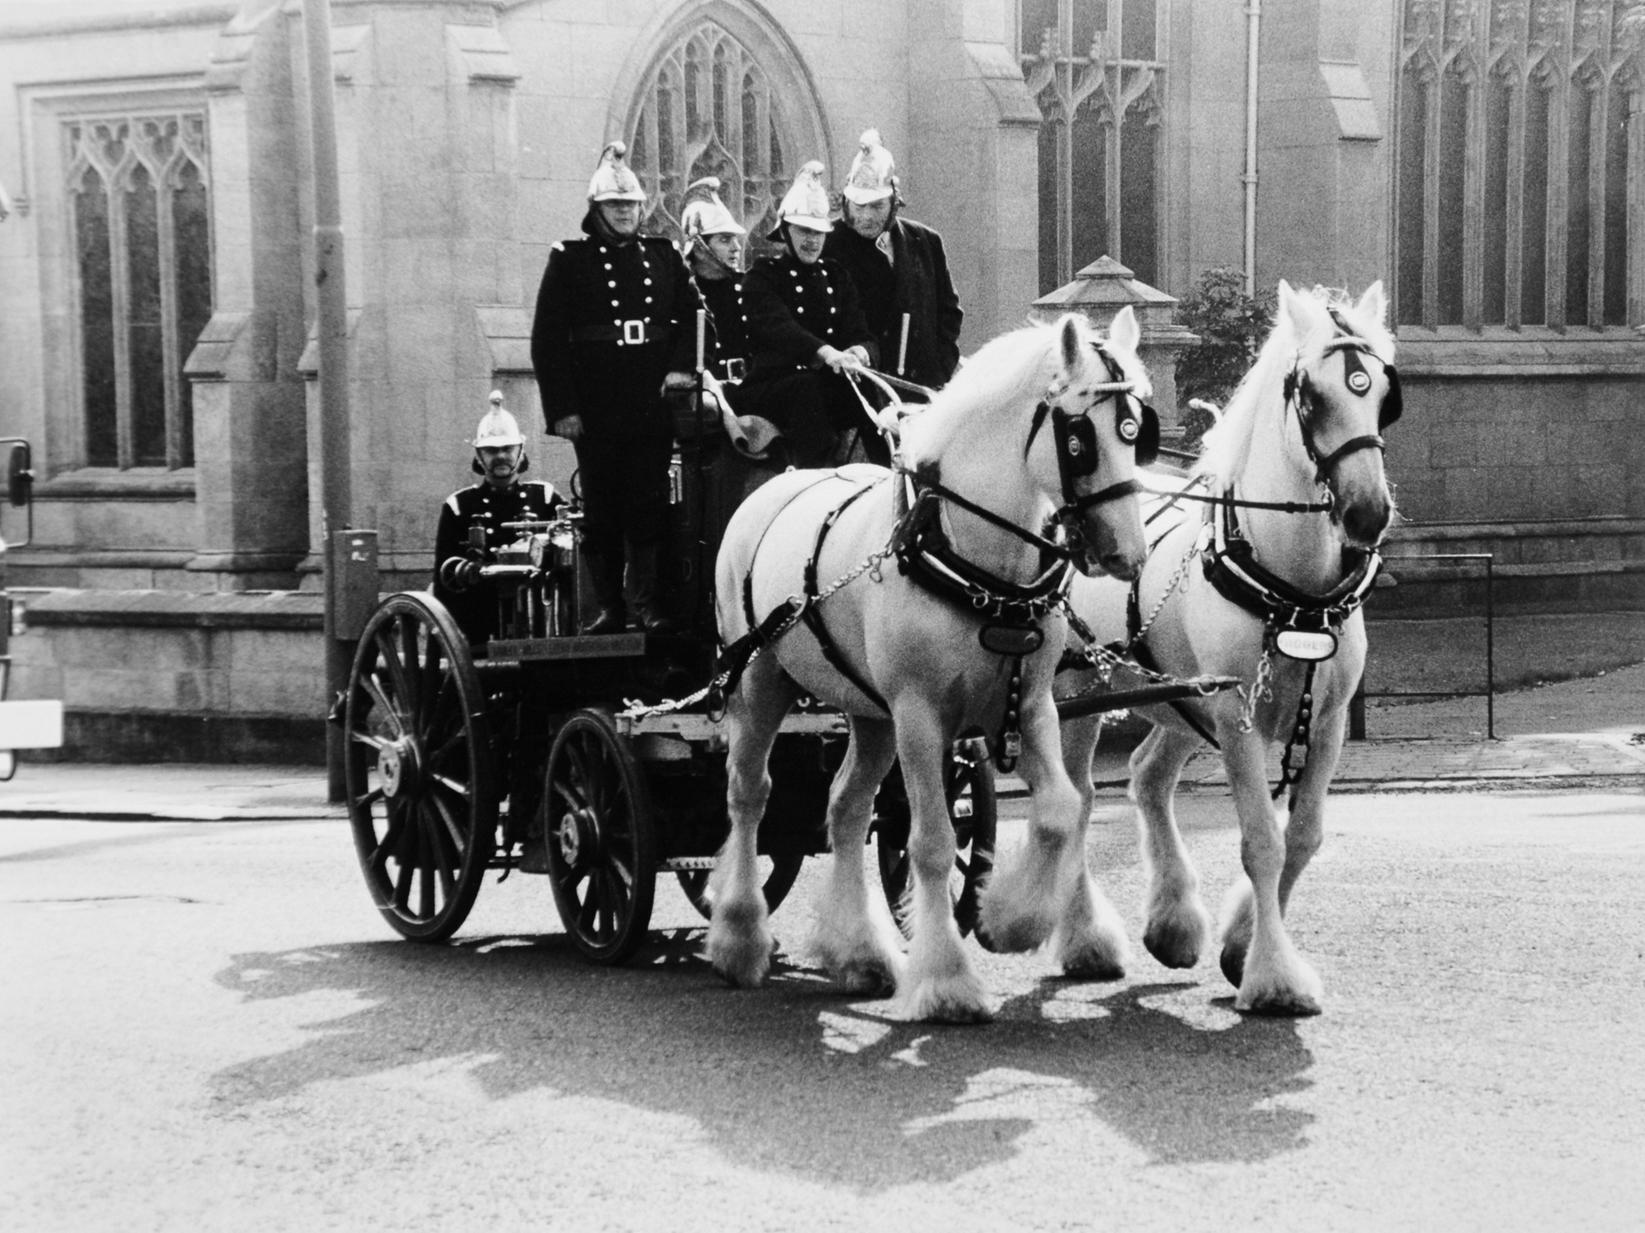 Firefighters and Tetley's horsemen pass Leeds Parish Church on this 1891 fire engine which was pulled through the city to commemorate the 50th anniversary of Gipton Fire Station.